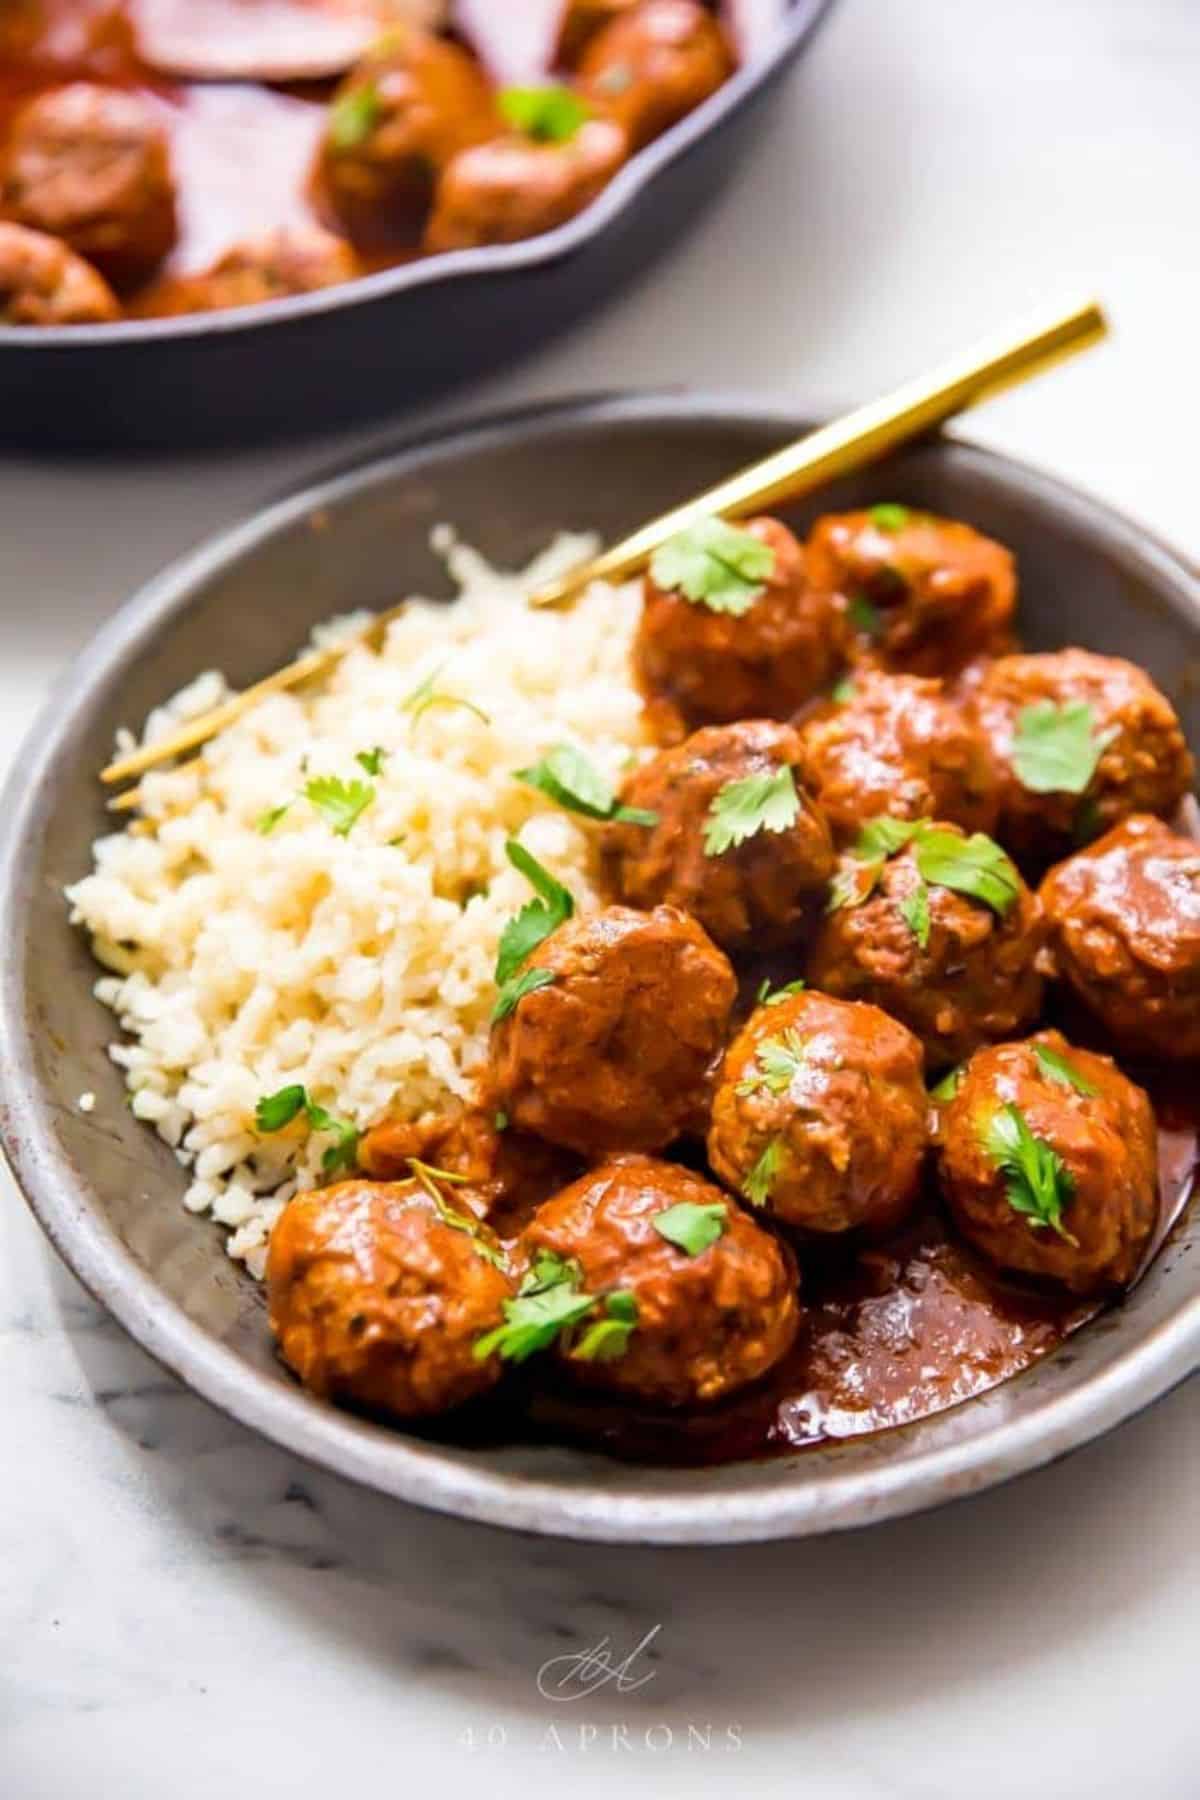 Indian Meatballs with Creamy Sauce and rice on a gray plate.